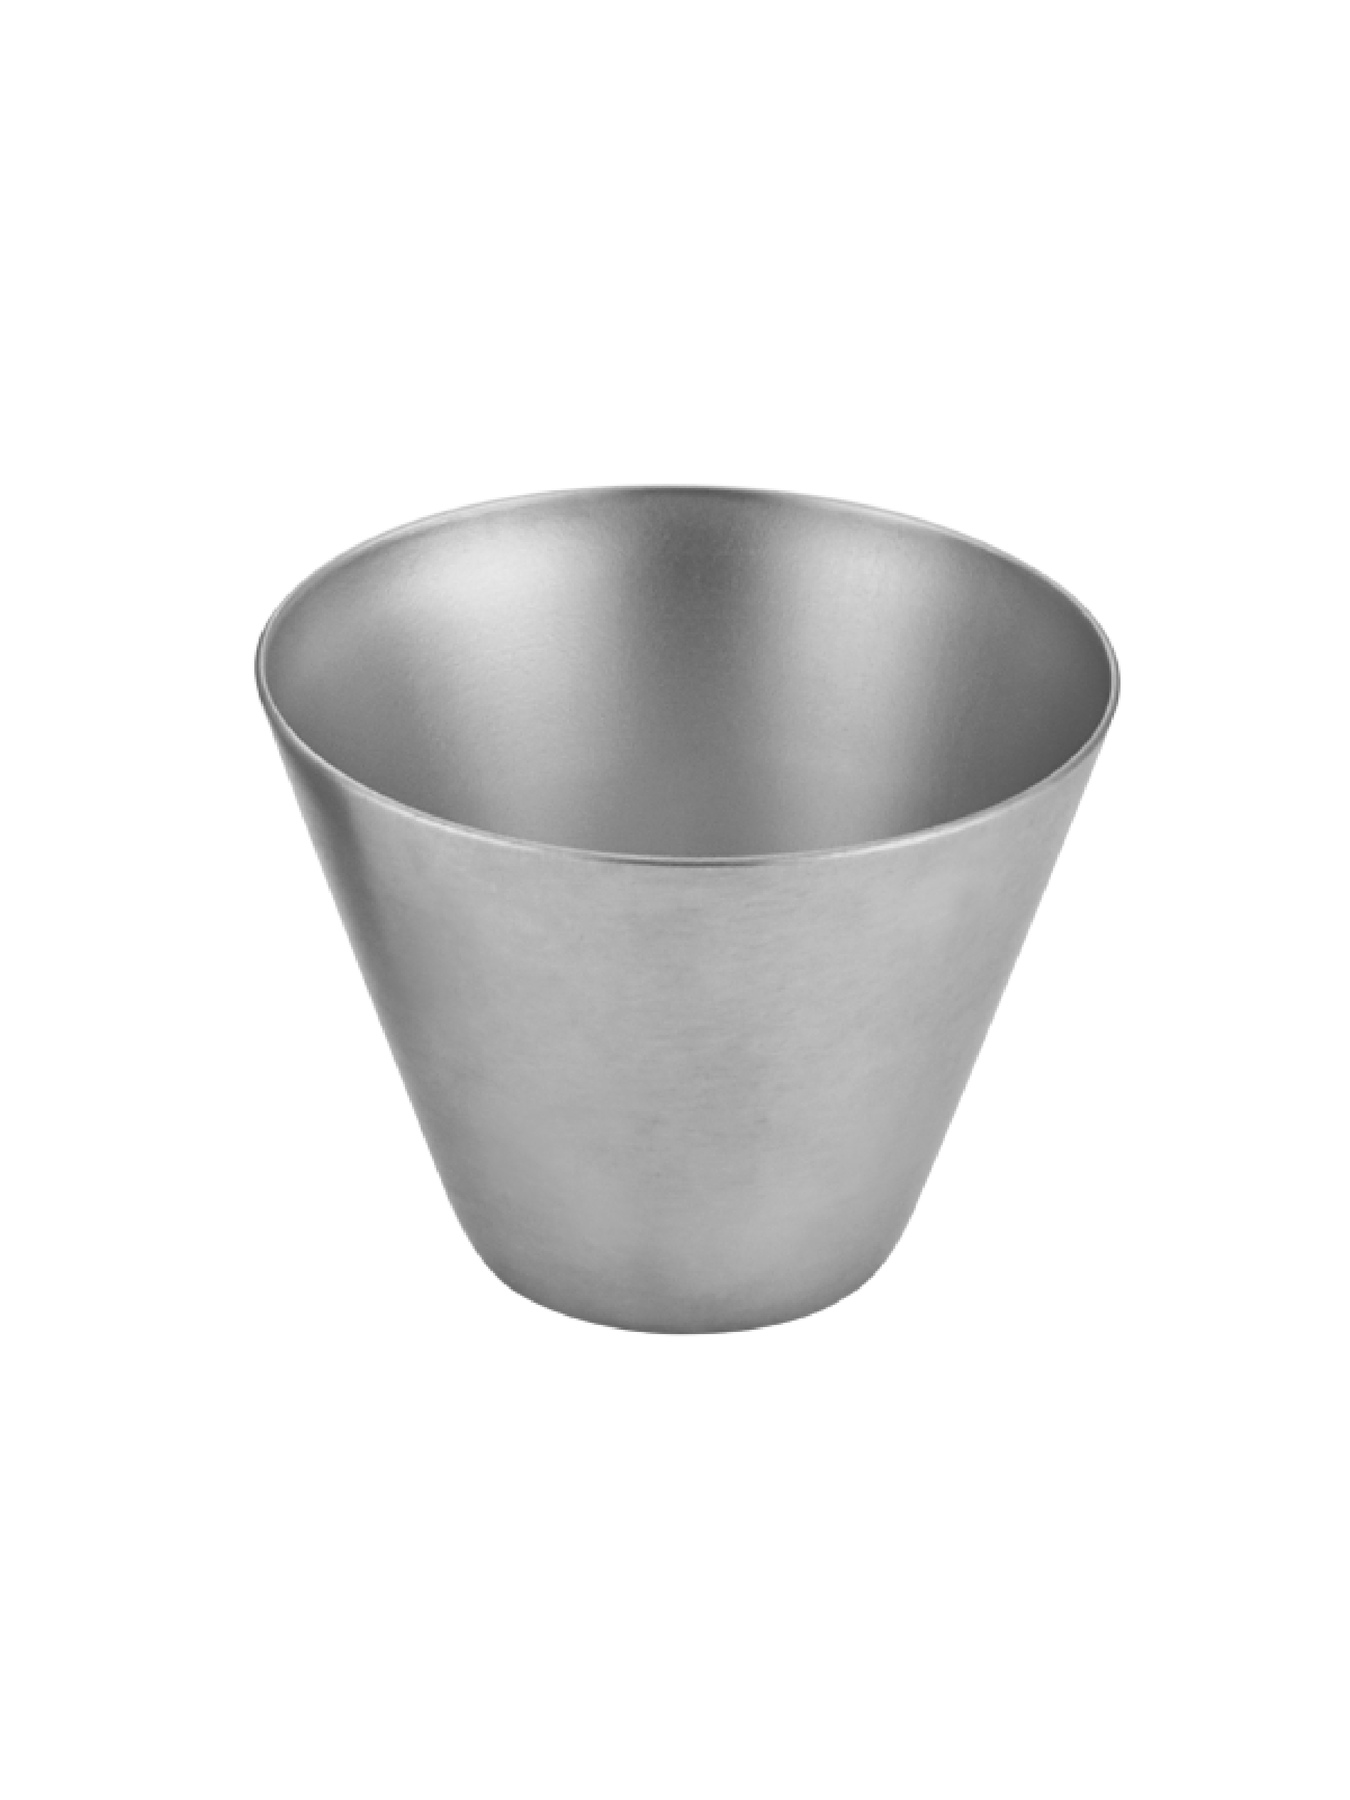 Conical - Nut Bowl